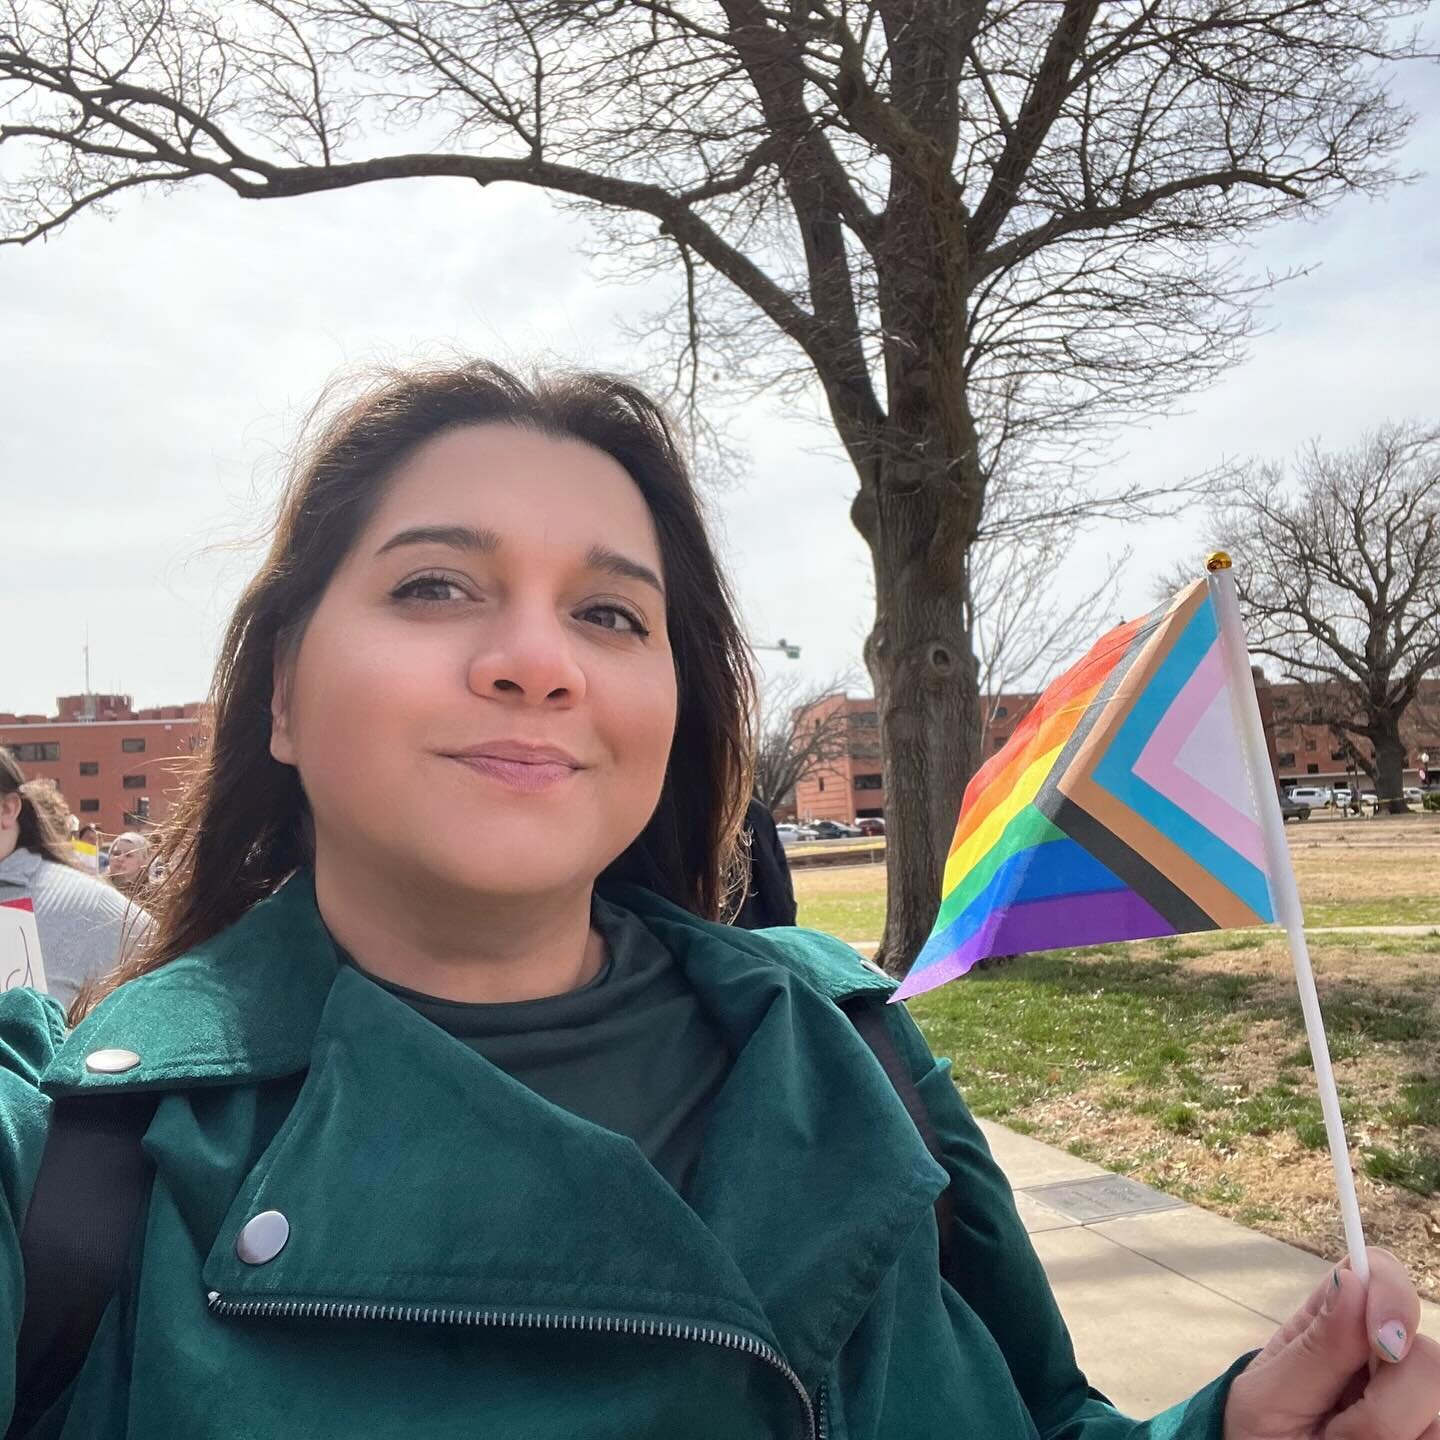 At Noon I hoofed it over to the &ldquo;March for Life, March for Rights, March for Nex Benedict&rdquo; walk out that started at the Seed Sower statue on OU&rsquo;s South Oval, went past the Cleveland County Courthouse and ended at Andrews Park. I was